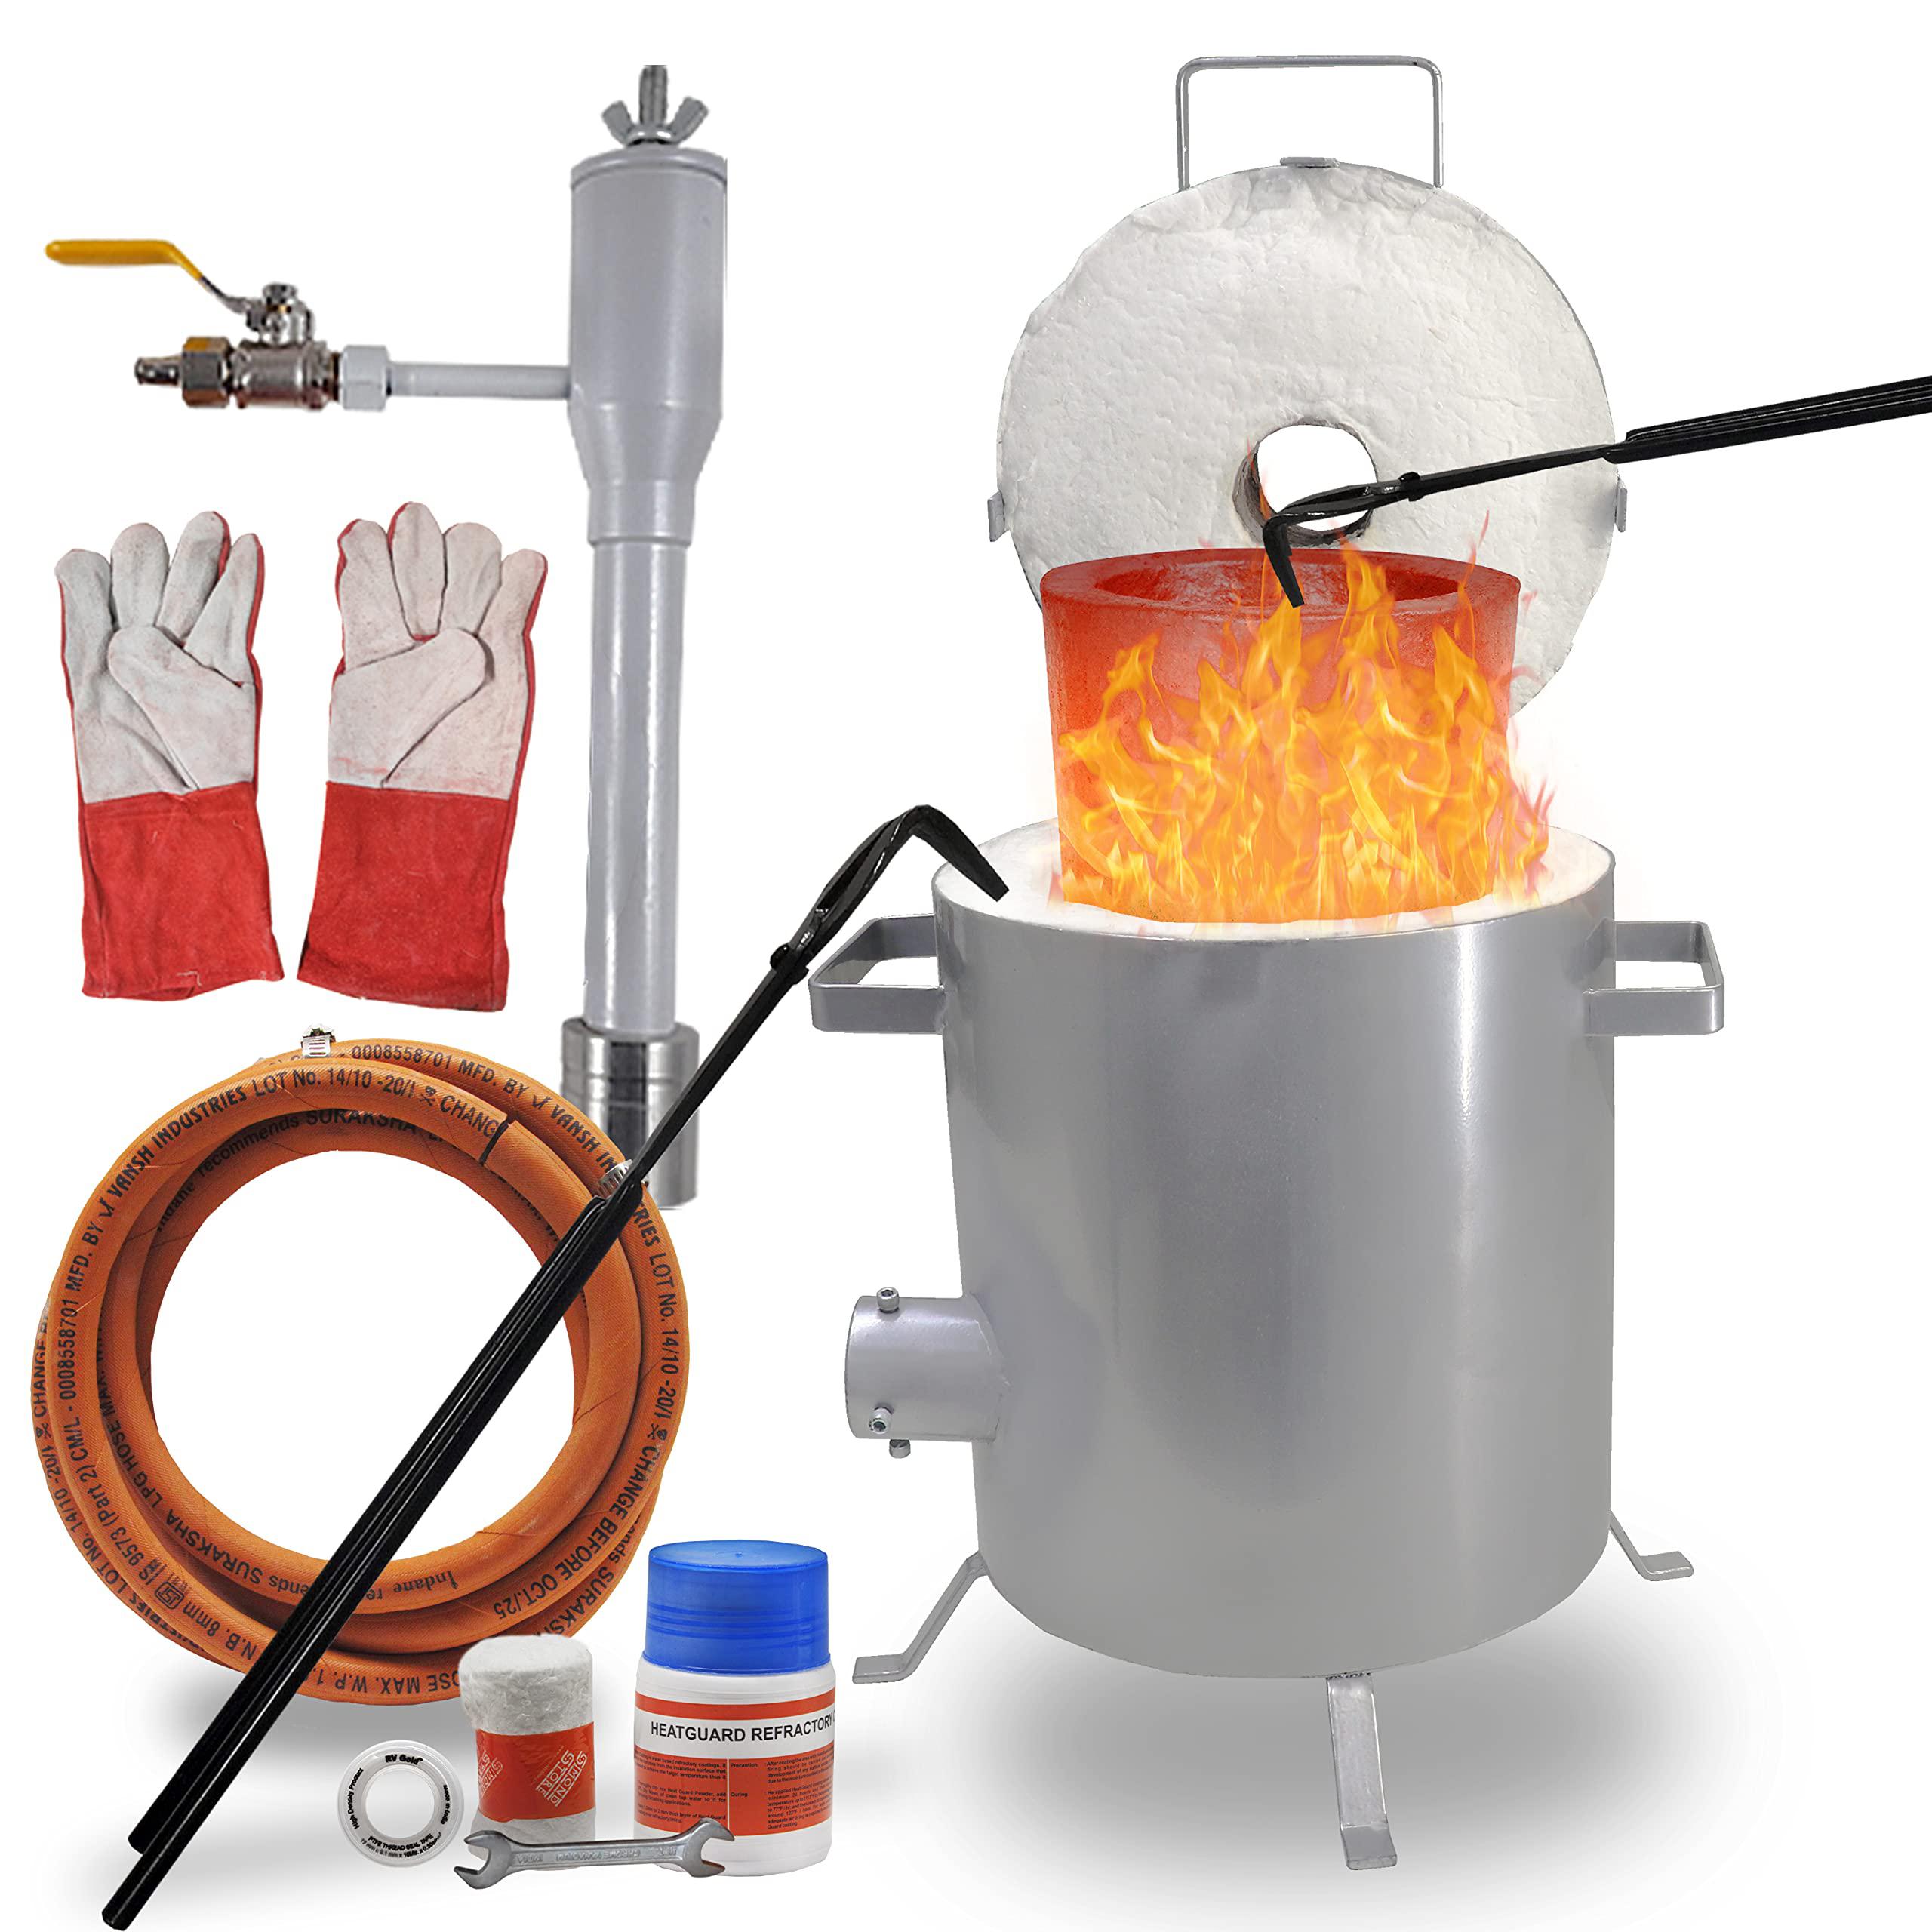 simond store 12 kg large capacity propane gas melting furnace kit w clay  graphite crucible gloves tong, kiln for casting refining gold sil